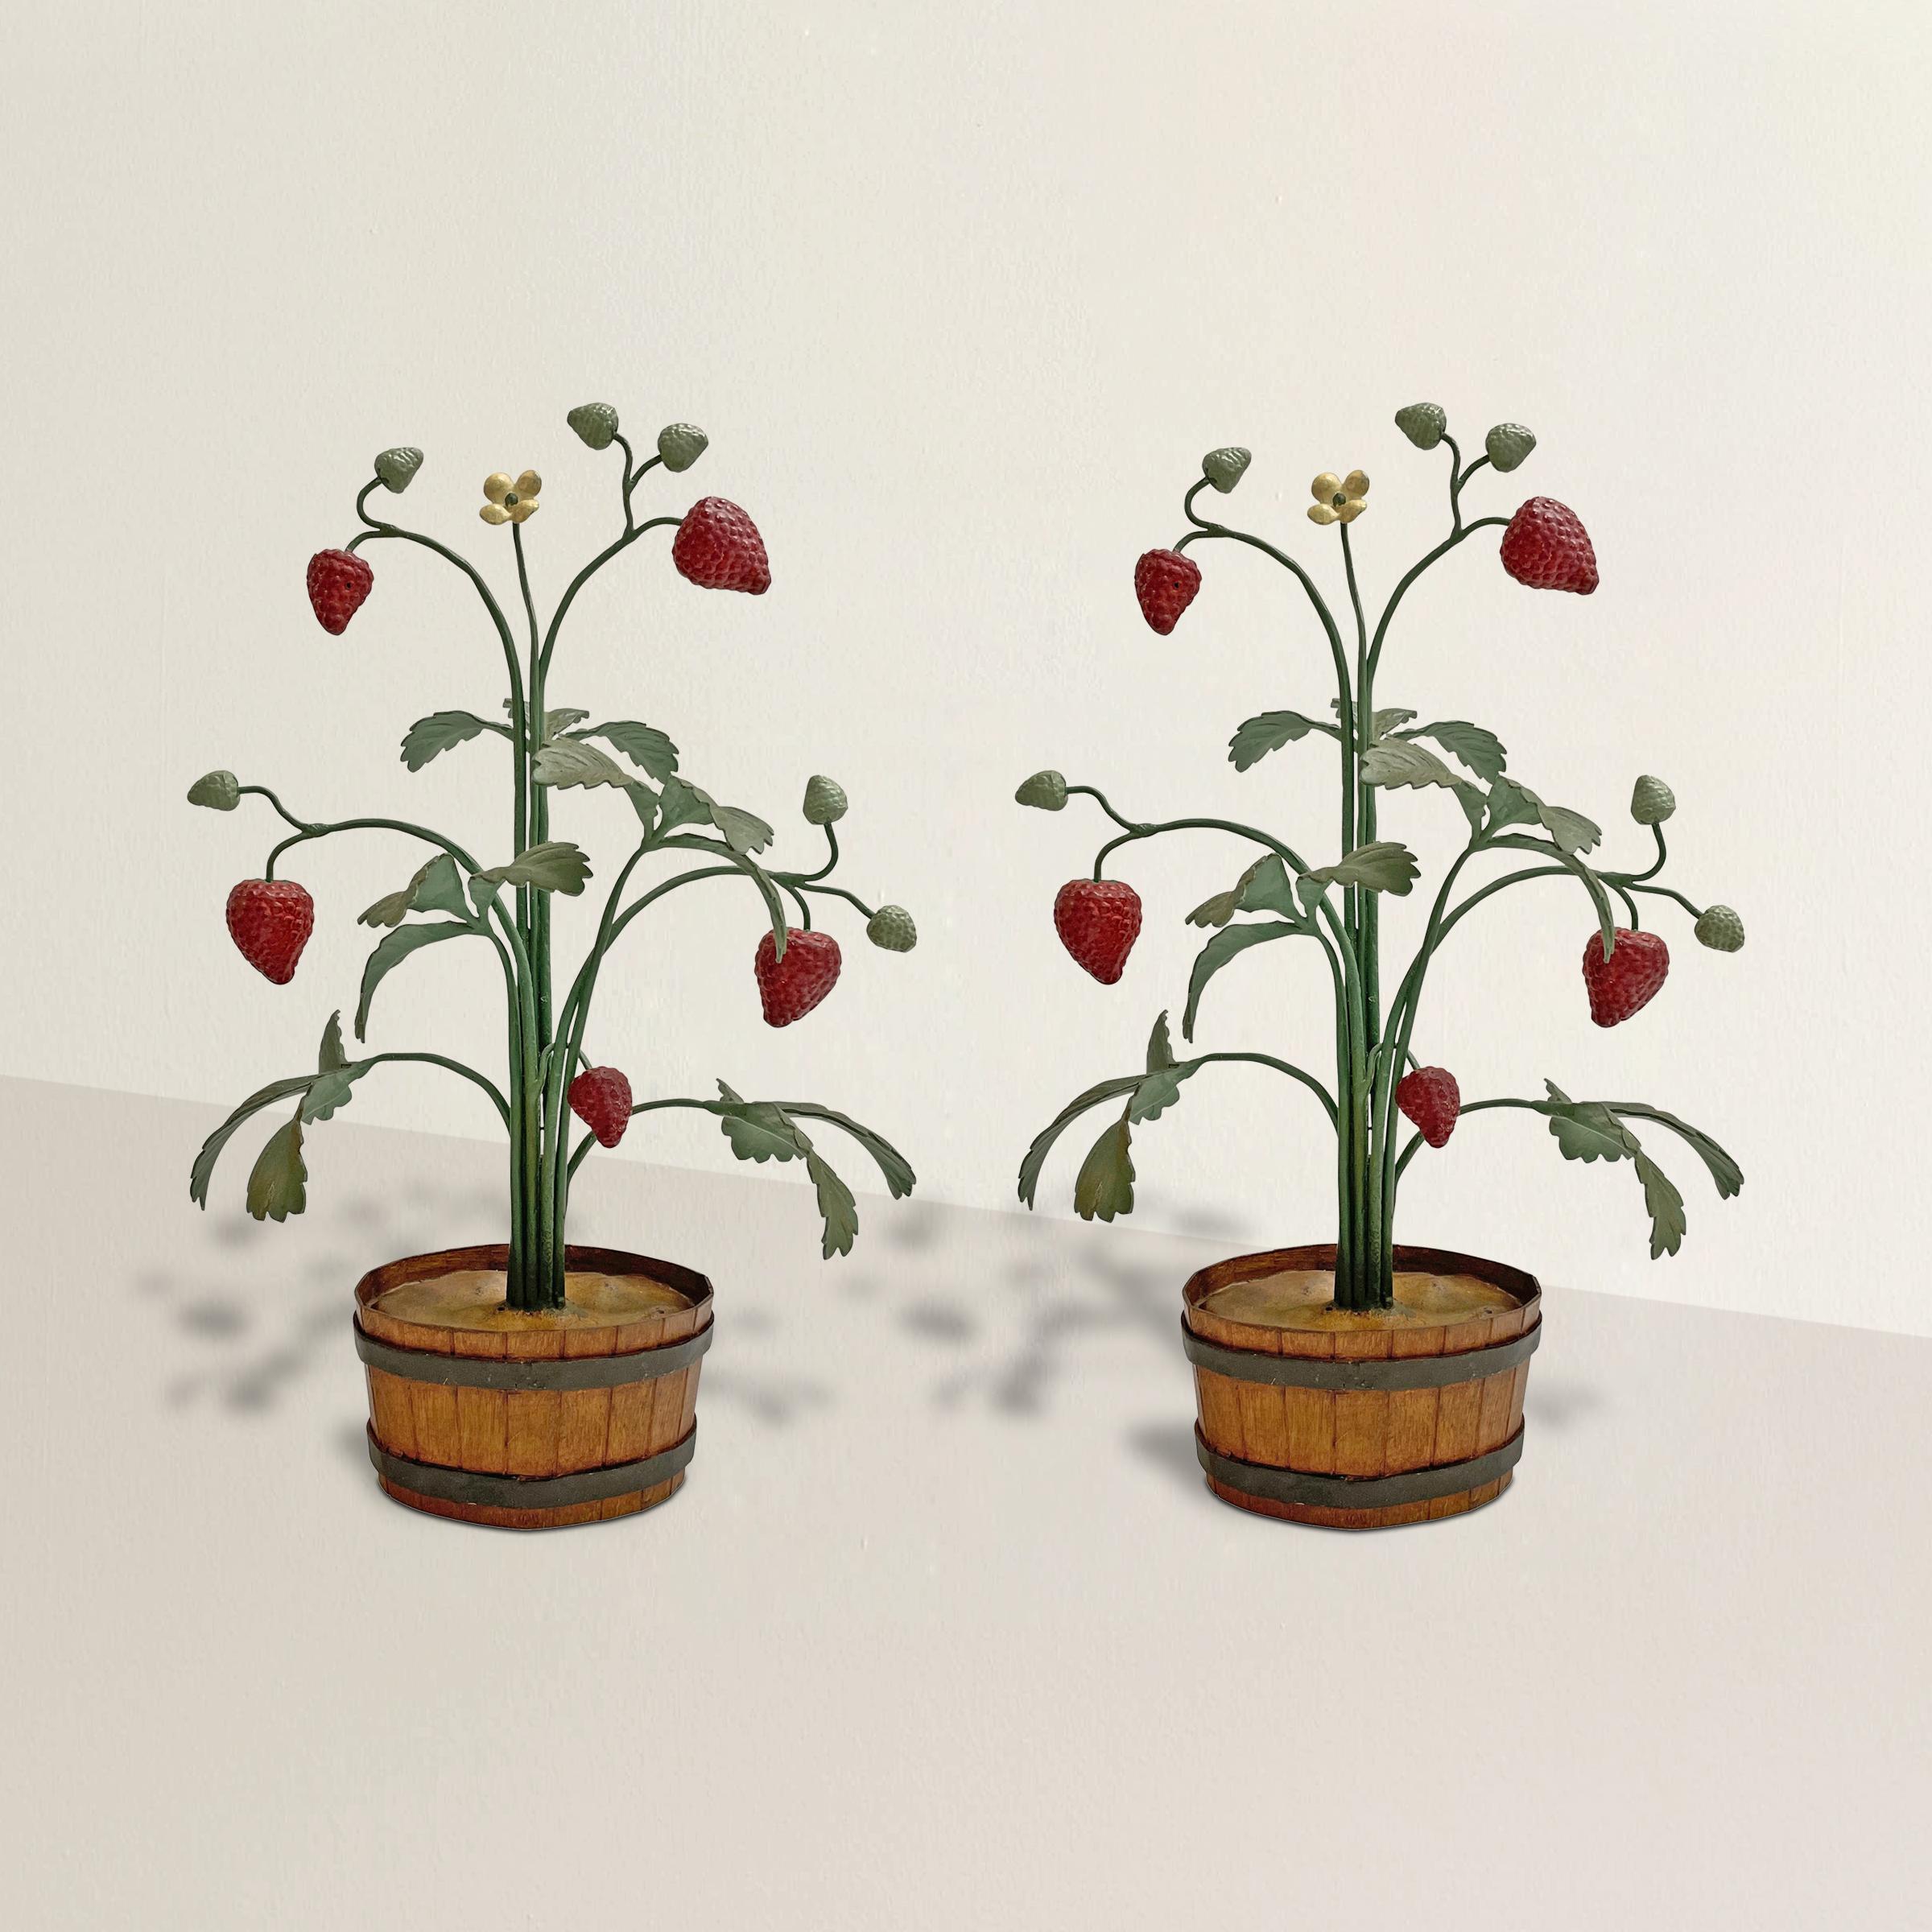 The most charming pair of vintage mid-20th century Italian tole strawberry topiaries with hand-painted leaves, berries, and flowers, and potted in tole buckets. Such a sweet pair, perfect for display on your mantel, console table, or on a shelf your